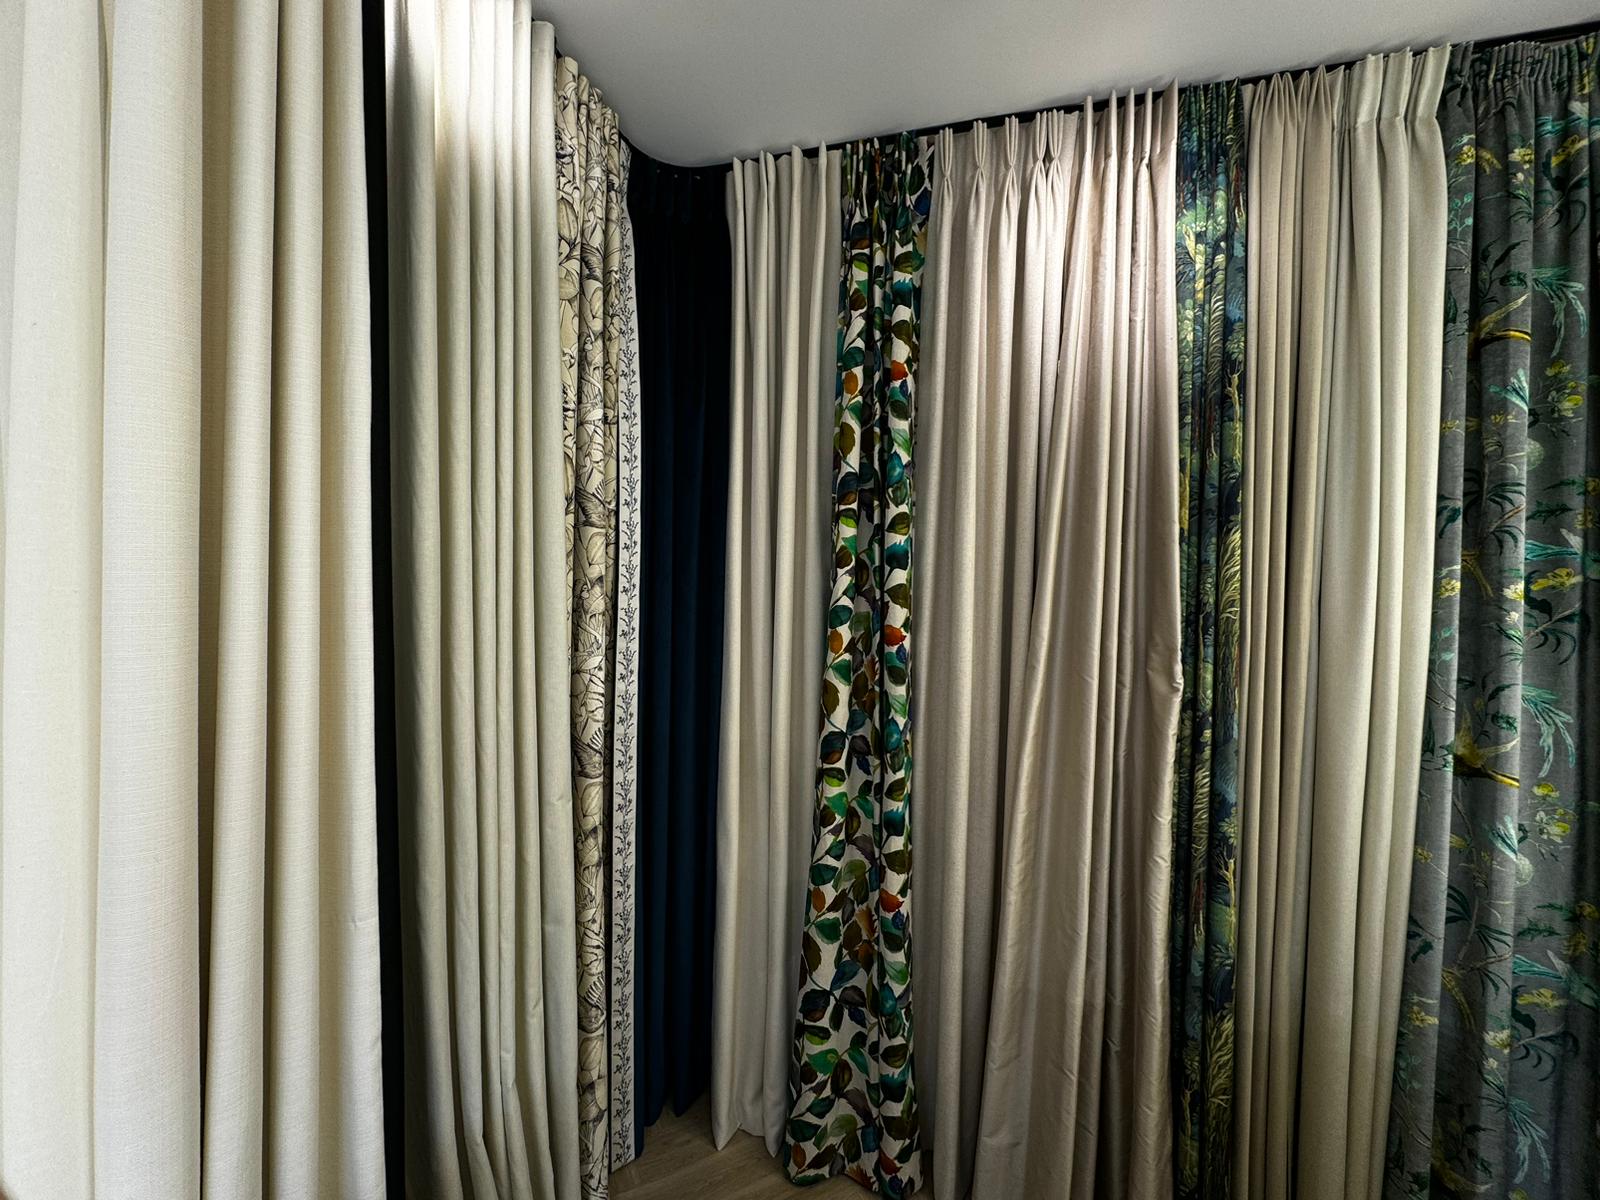 A display of curtains in our North London showroom using various fabrics with a selection of curtain headings - Pinch Pleat, Cartridge Pleat, Wave Heading, Inverted Pleat, Pencil Pleat and more